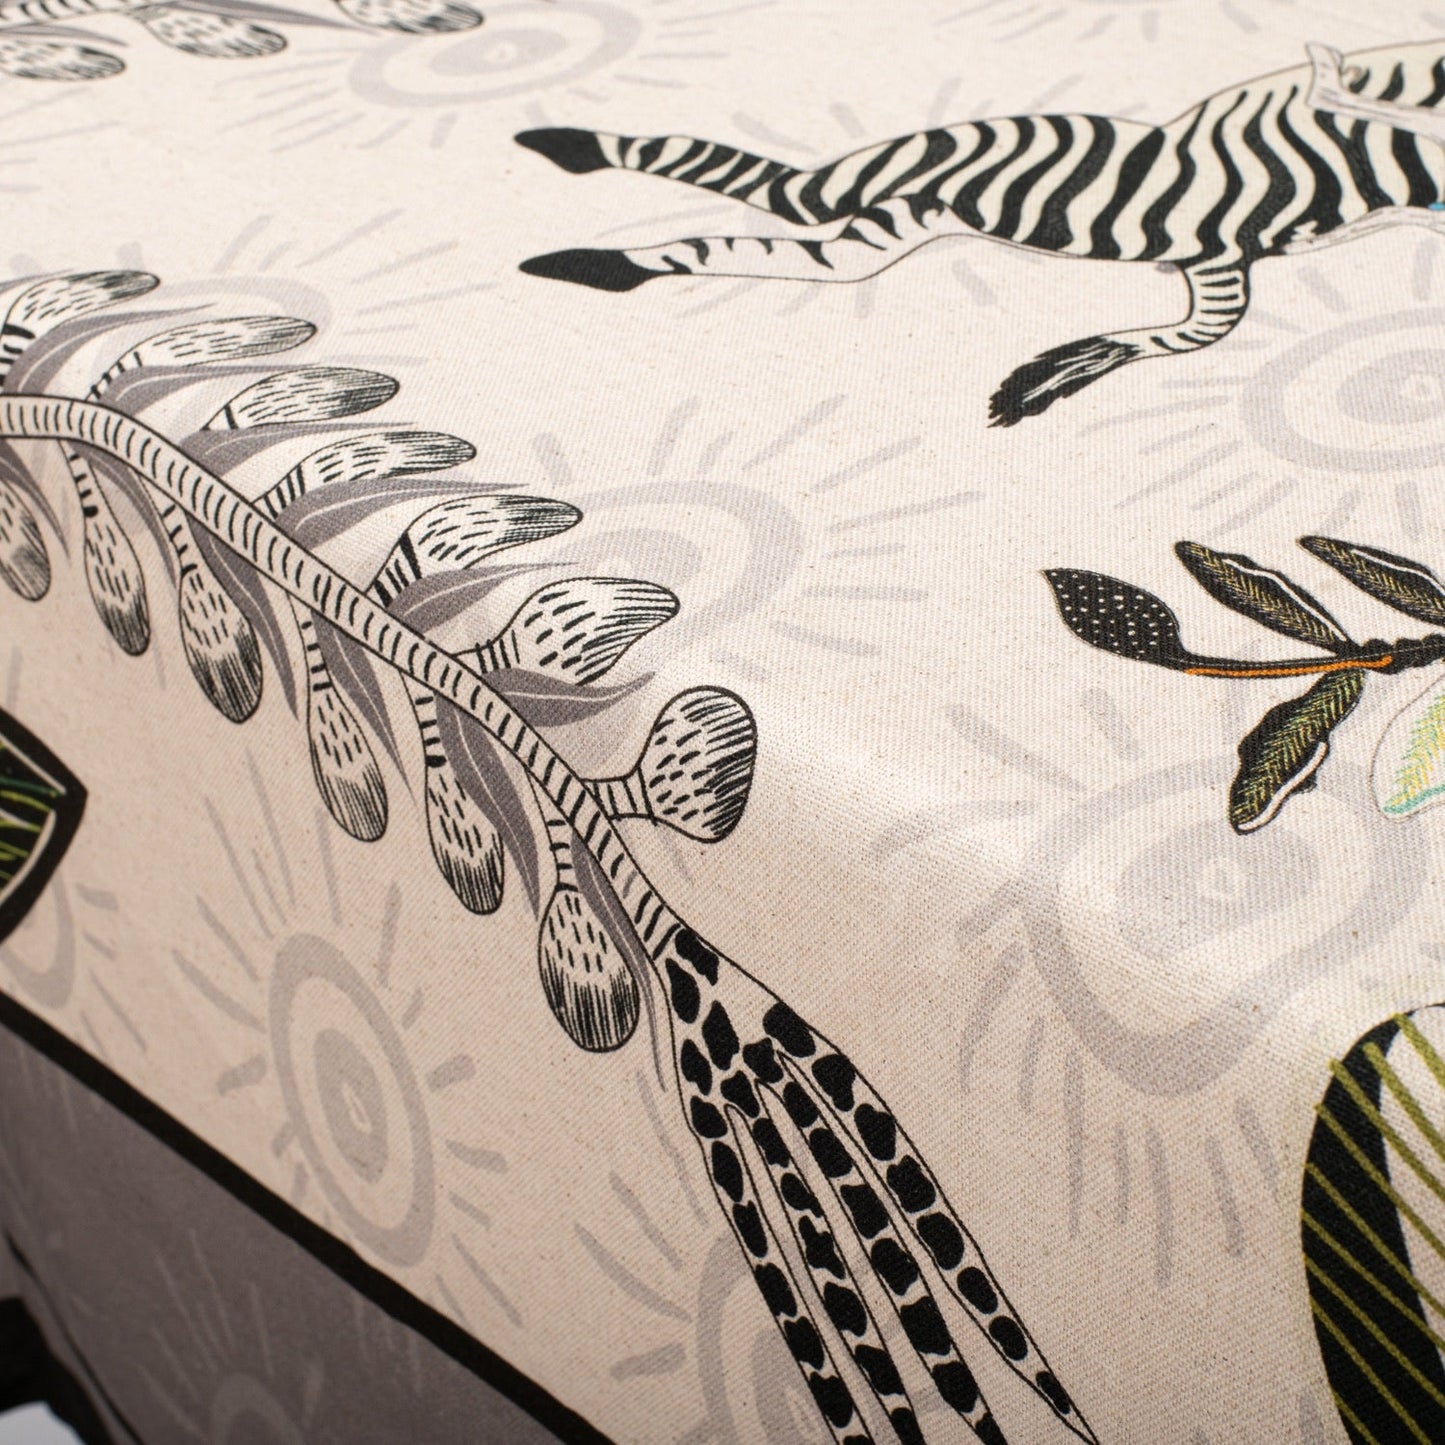 Royal Leopard Tablecloth Charcoal on Natural